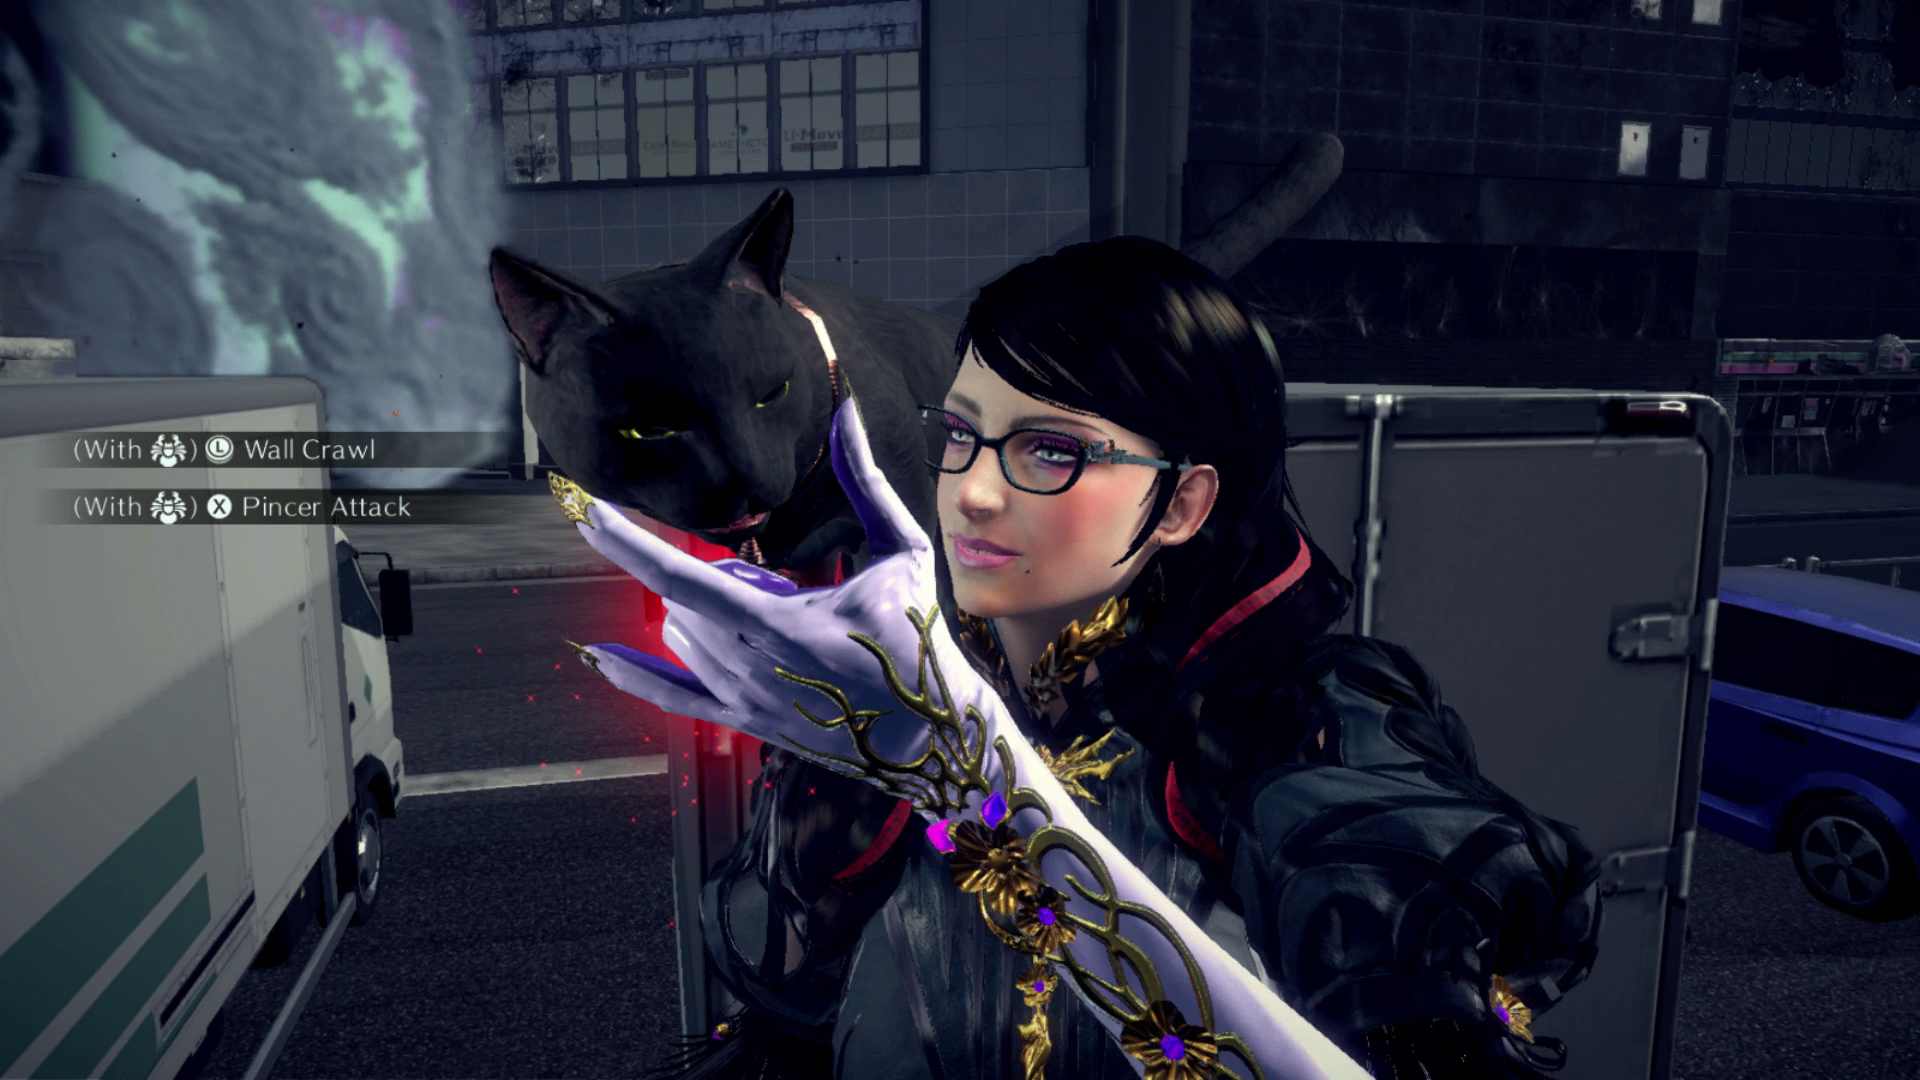 Watch nearly 8 minutes of 'Bayonetta 3' gameplay in a new trailer